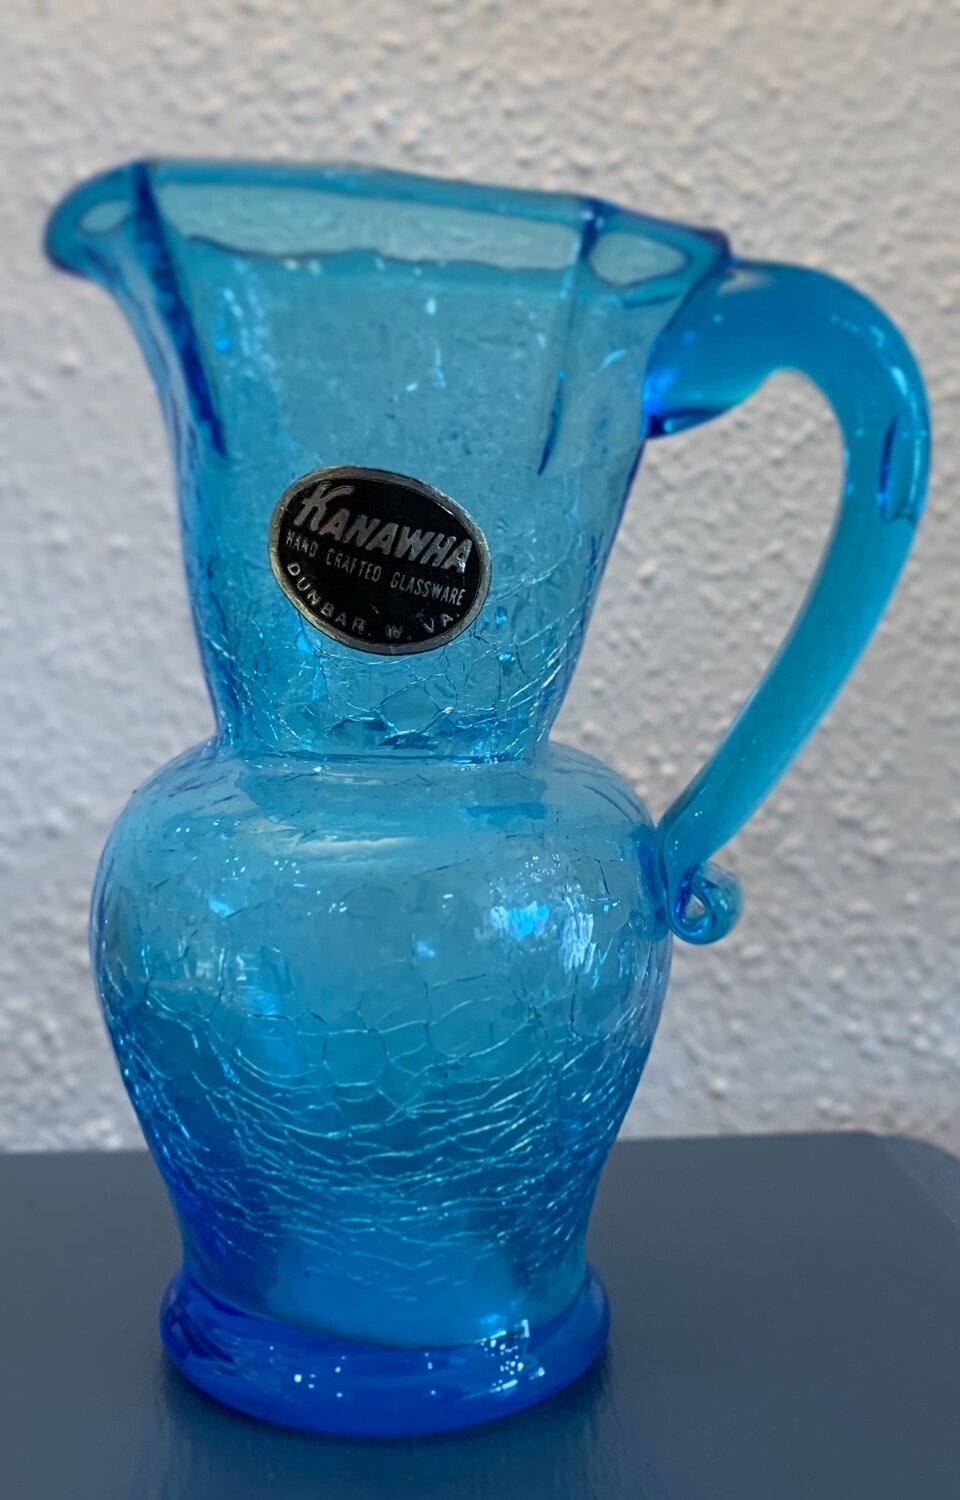 Vintage Small Blue Crackle Glass Pitcher